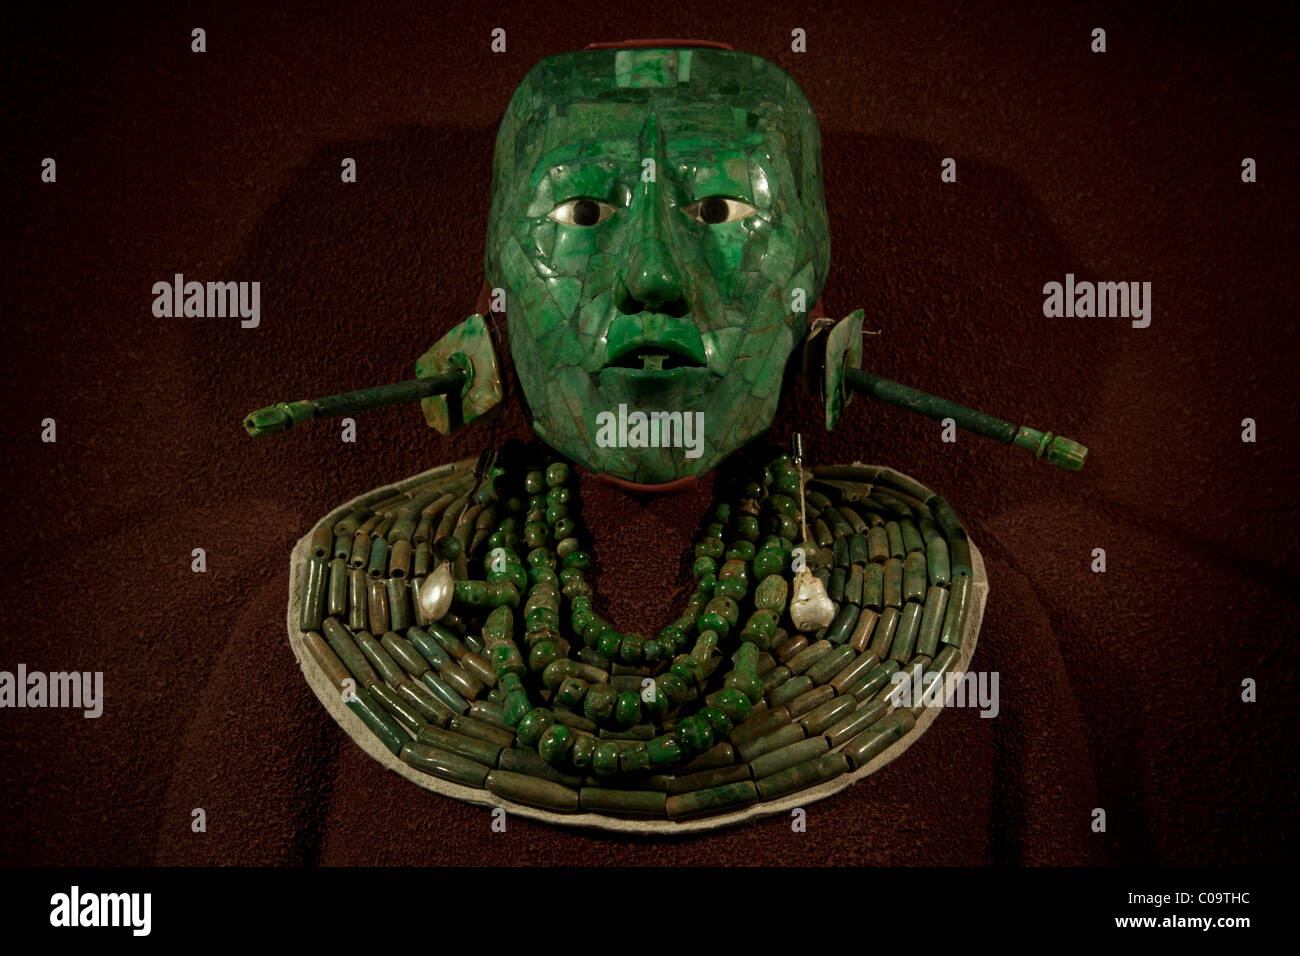 Jade mosaic funeral death mask of Mayan king Pakal from Palenque, now in the National Museum of Anthropology, Mexico City. Stock Photo